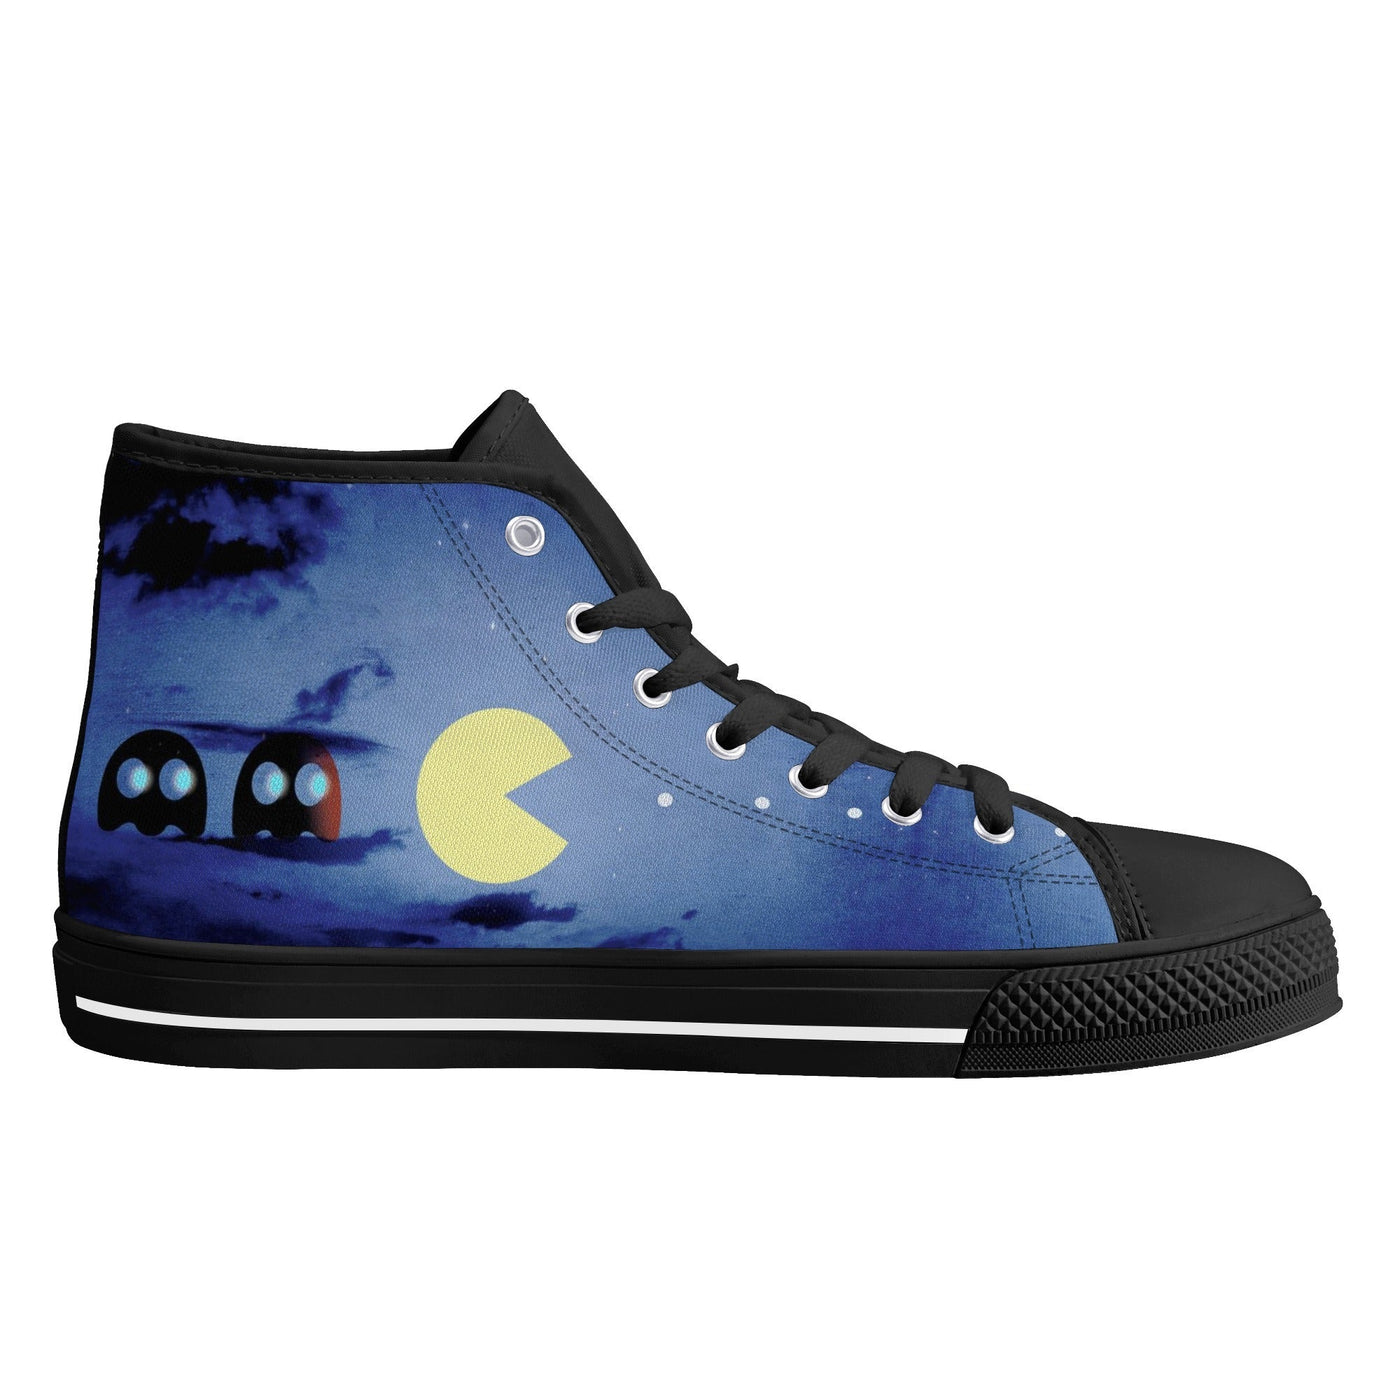 Pac-scape day/night - Pacman Shoes | Retro Gamer High top sneakers (Women's sizes)